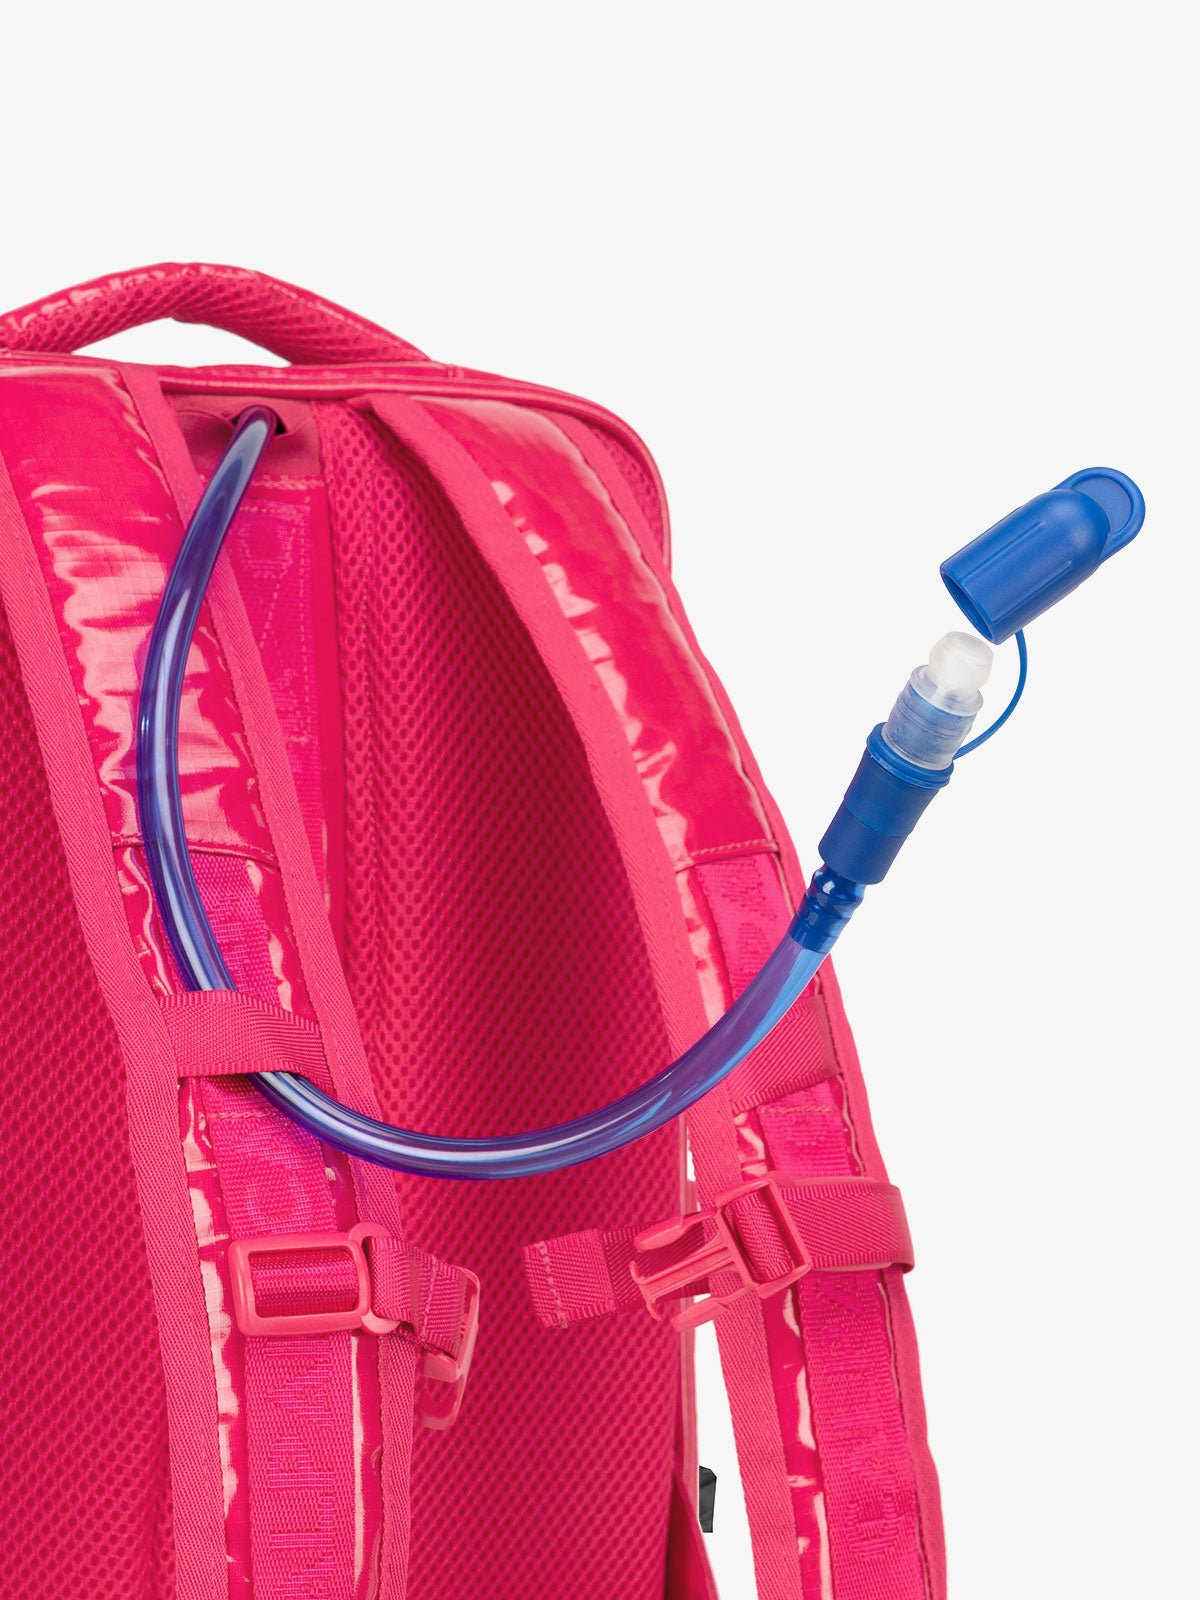 Close up of removable hydration reservoir straw with valve cap in pink